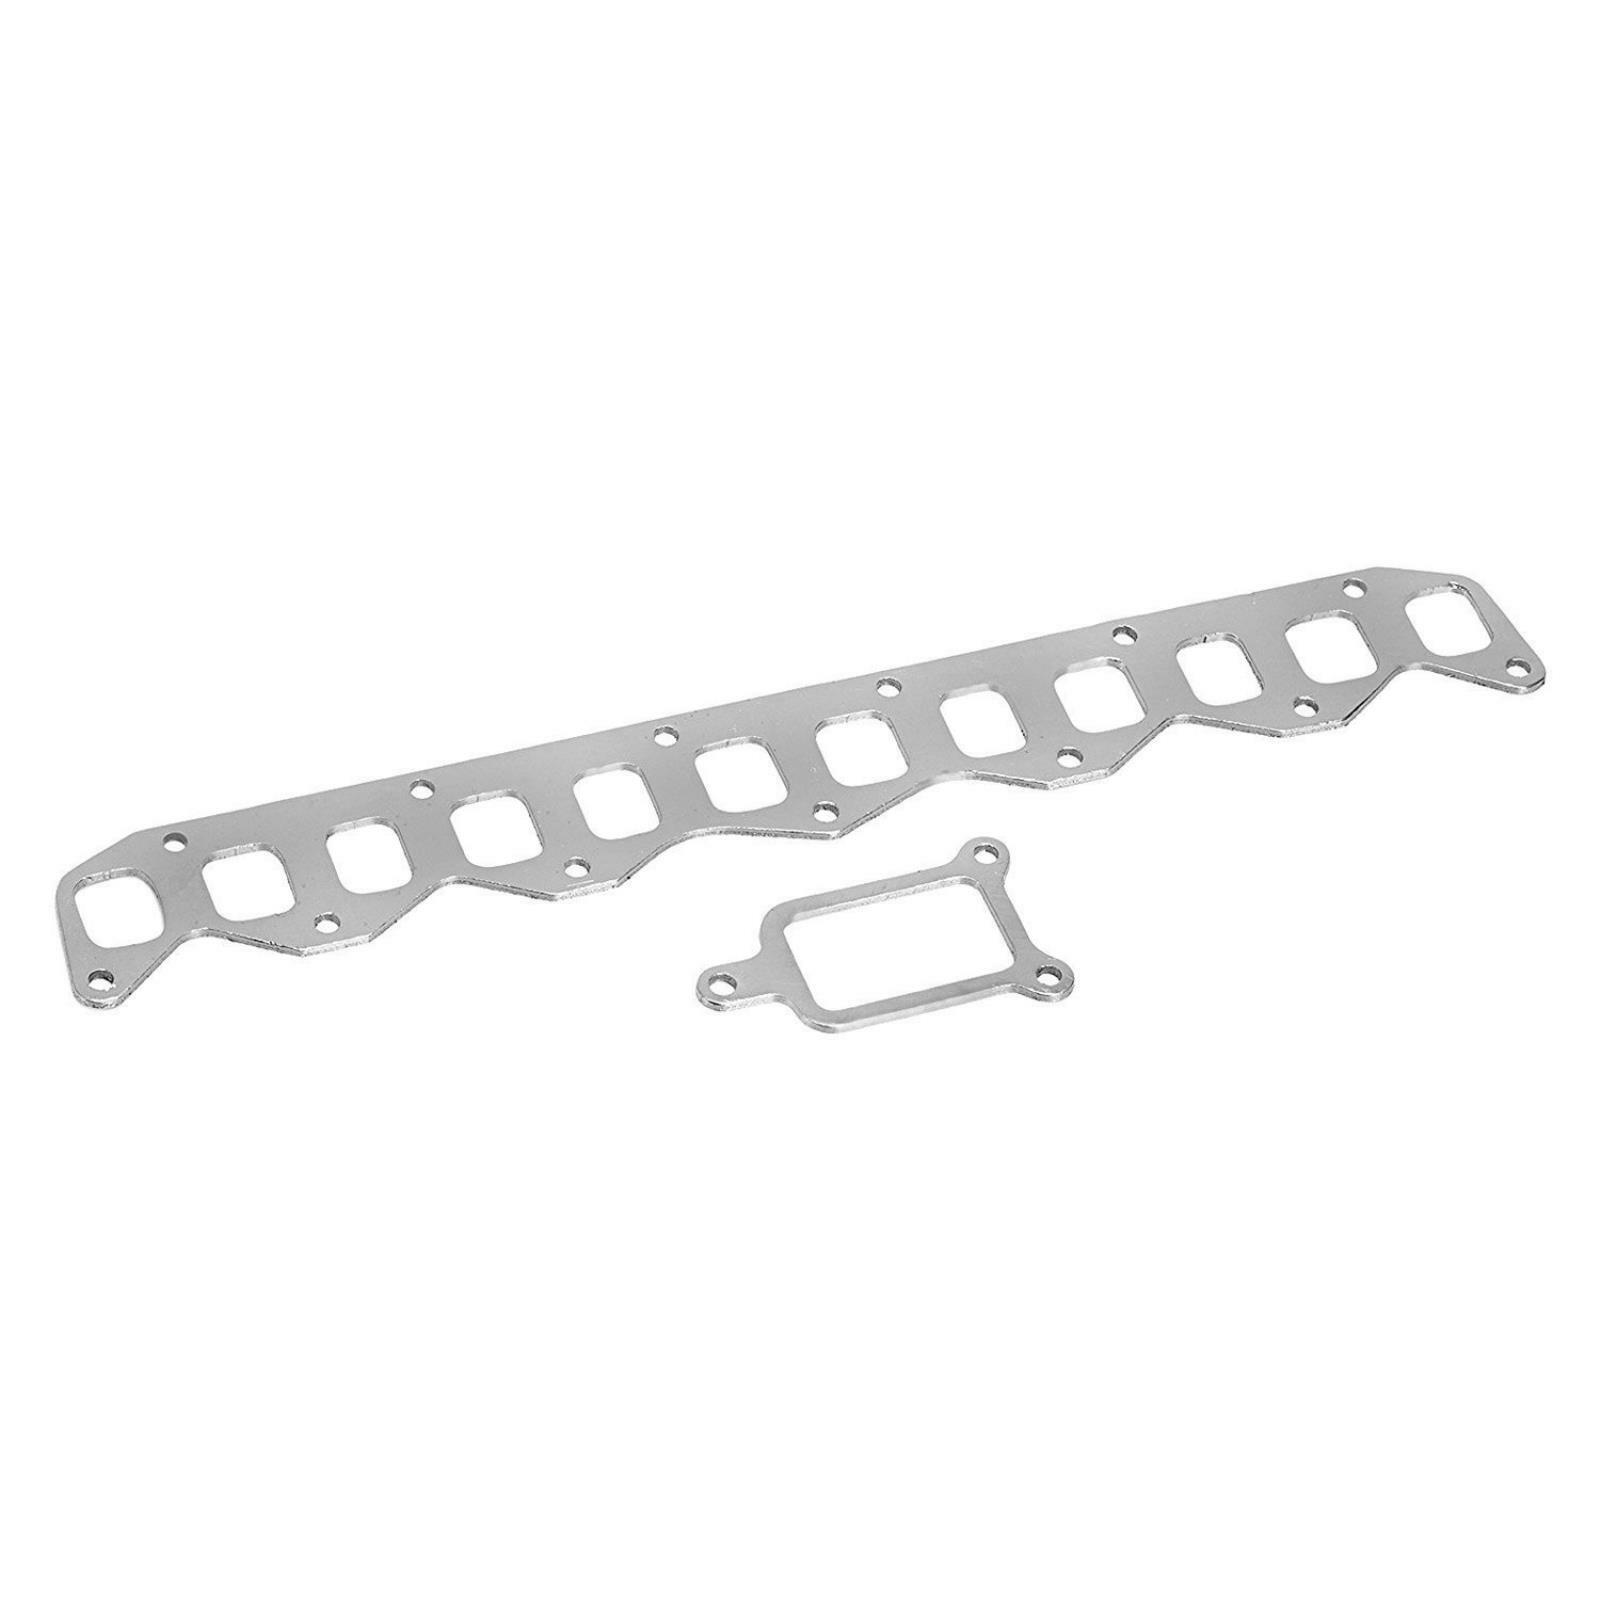 Exhaust Header Gaskets by Remflex 282BAF. Fits 1976-1980 Plymouth Volare